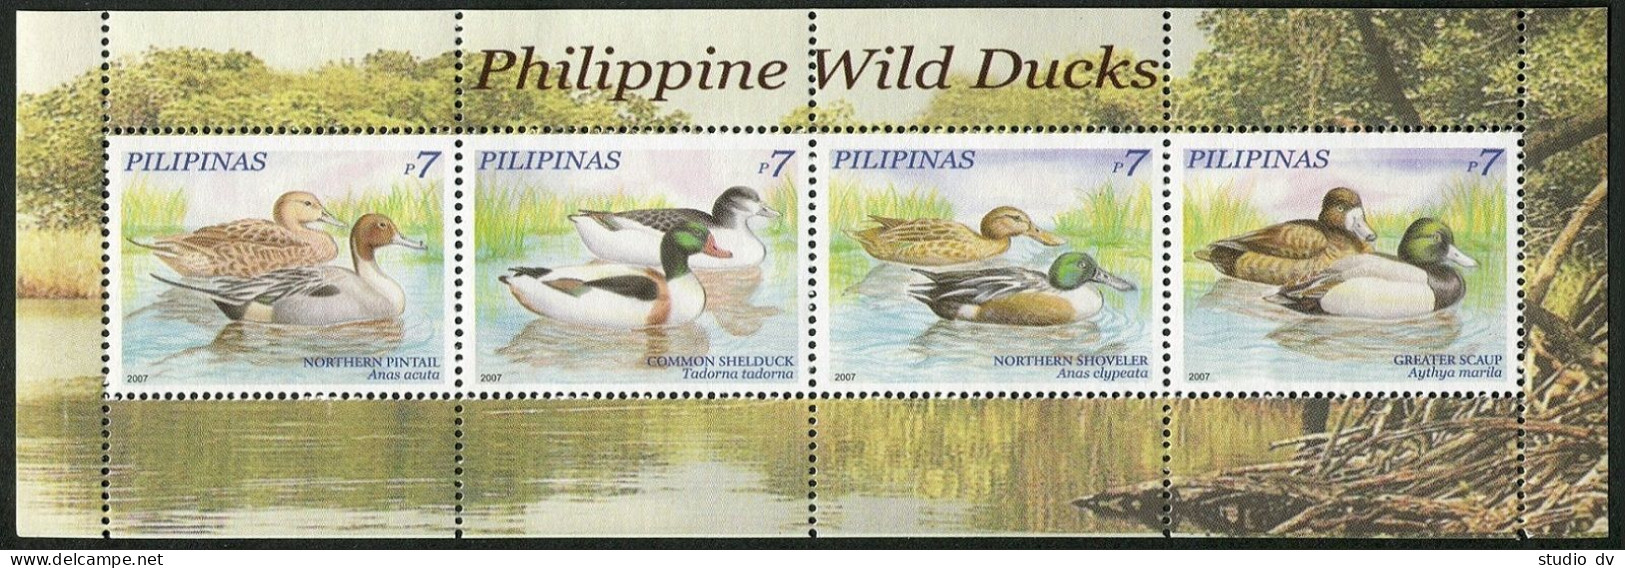 Philippines 3098 Ad Block,3099-3100 Ad Sheets,MNH. Ducks And Geese, 2007. - Filippine